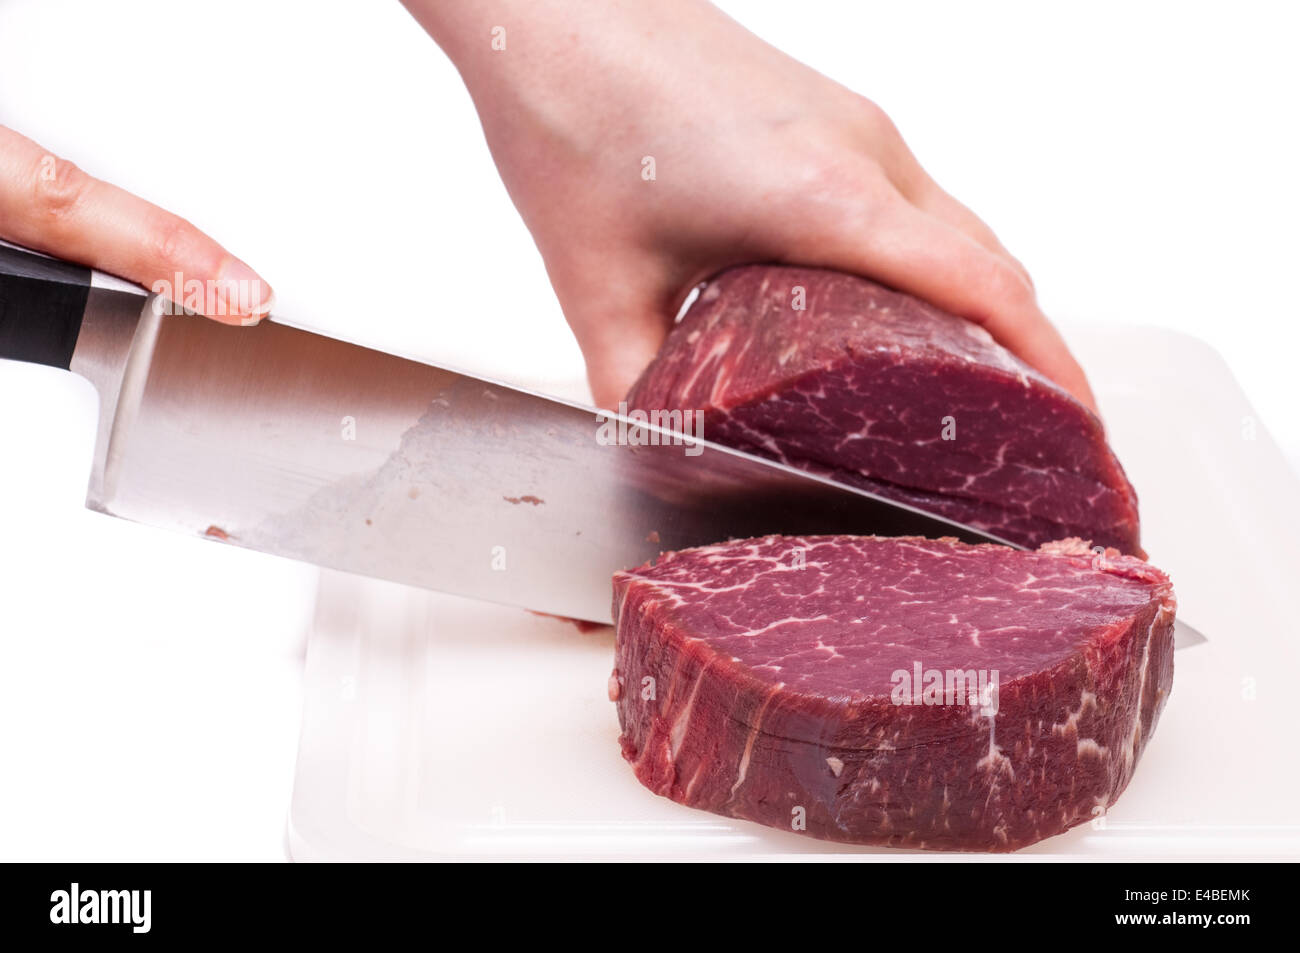 Cooking knife is slicing a fillet of beef Stock Photo